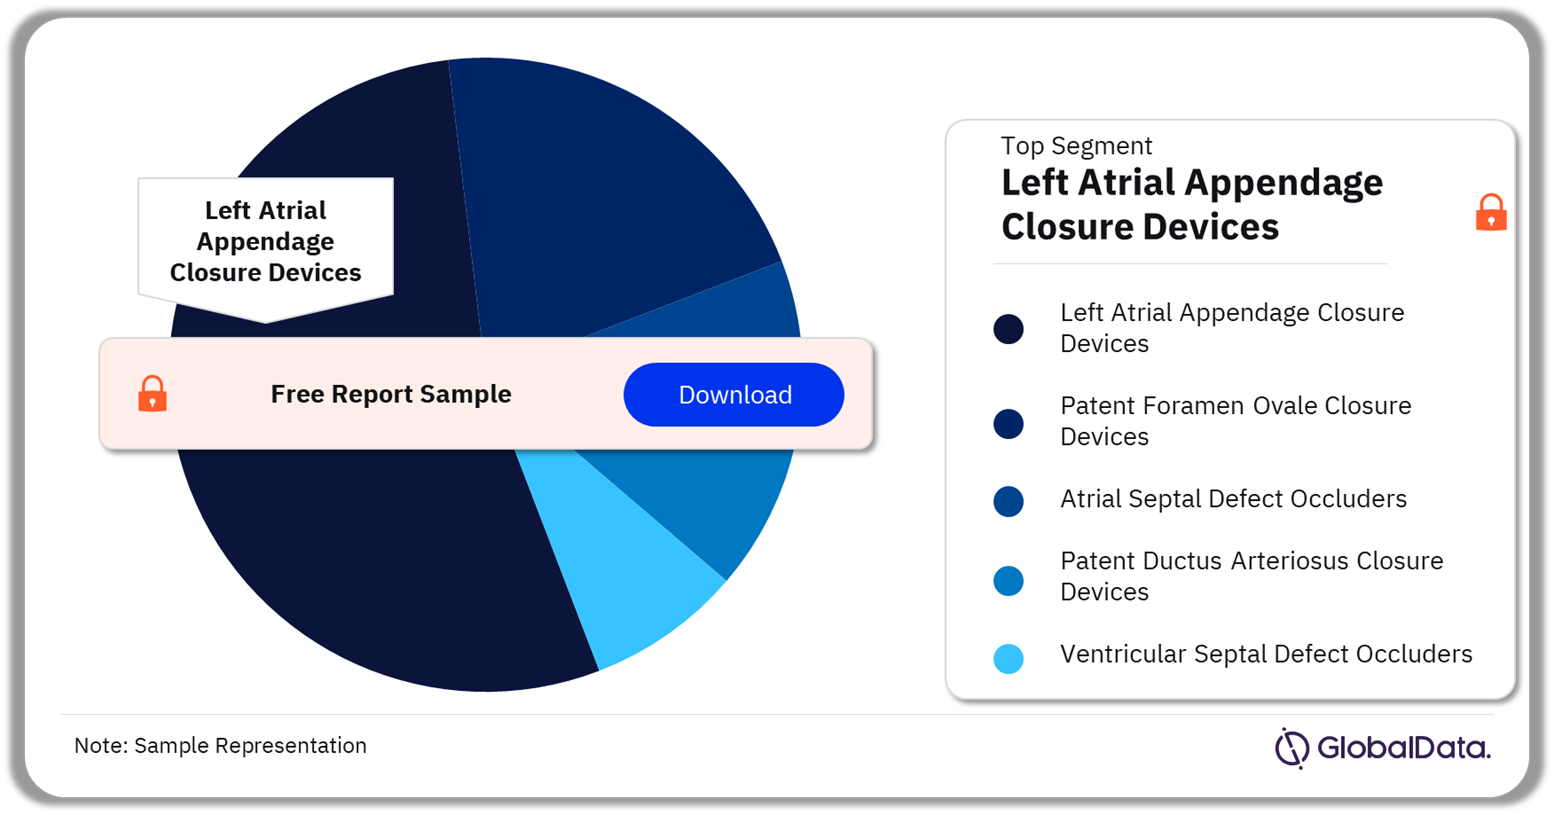 Structural Heart Occlusion Devices Market Analysis by Segments, 2023 (%)